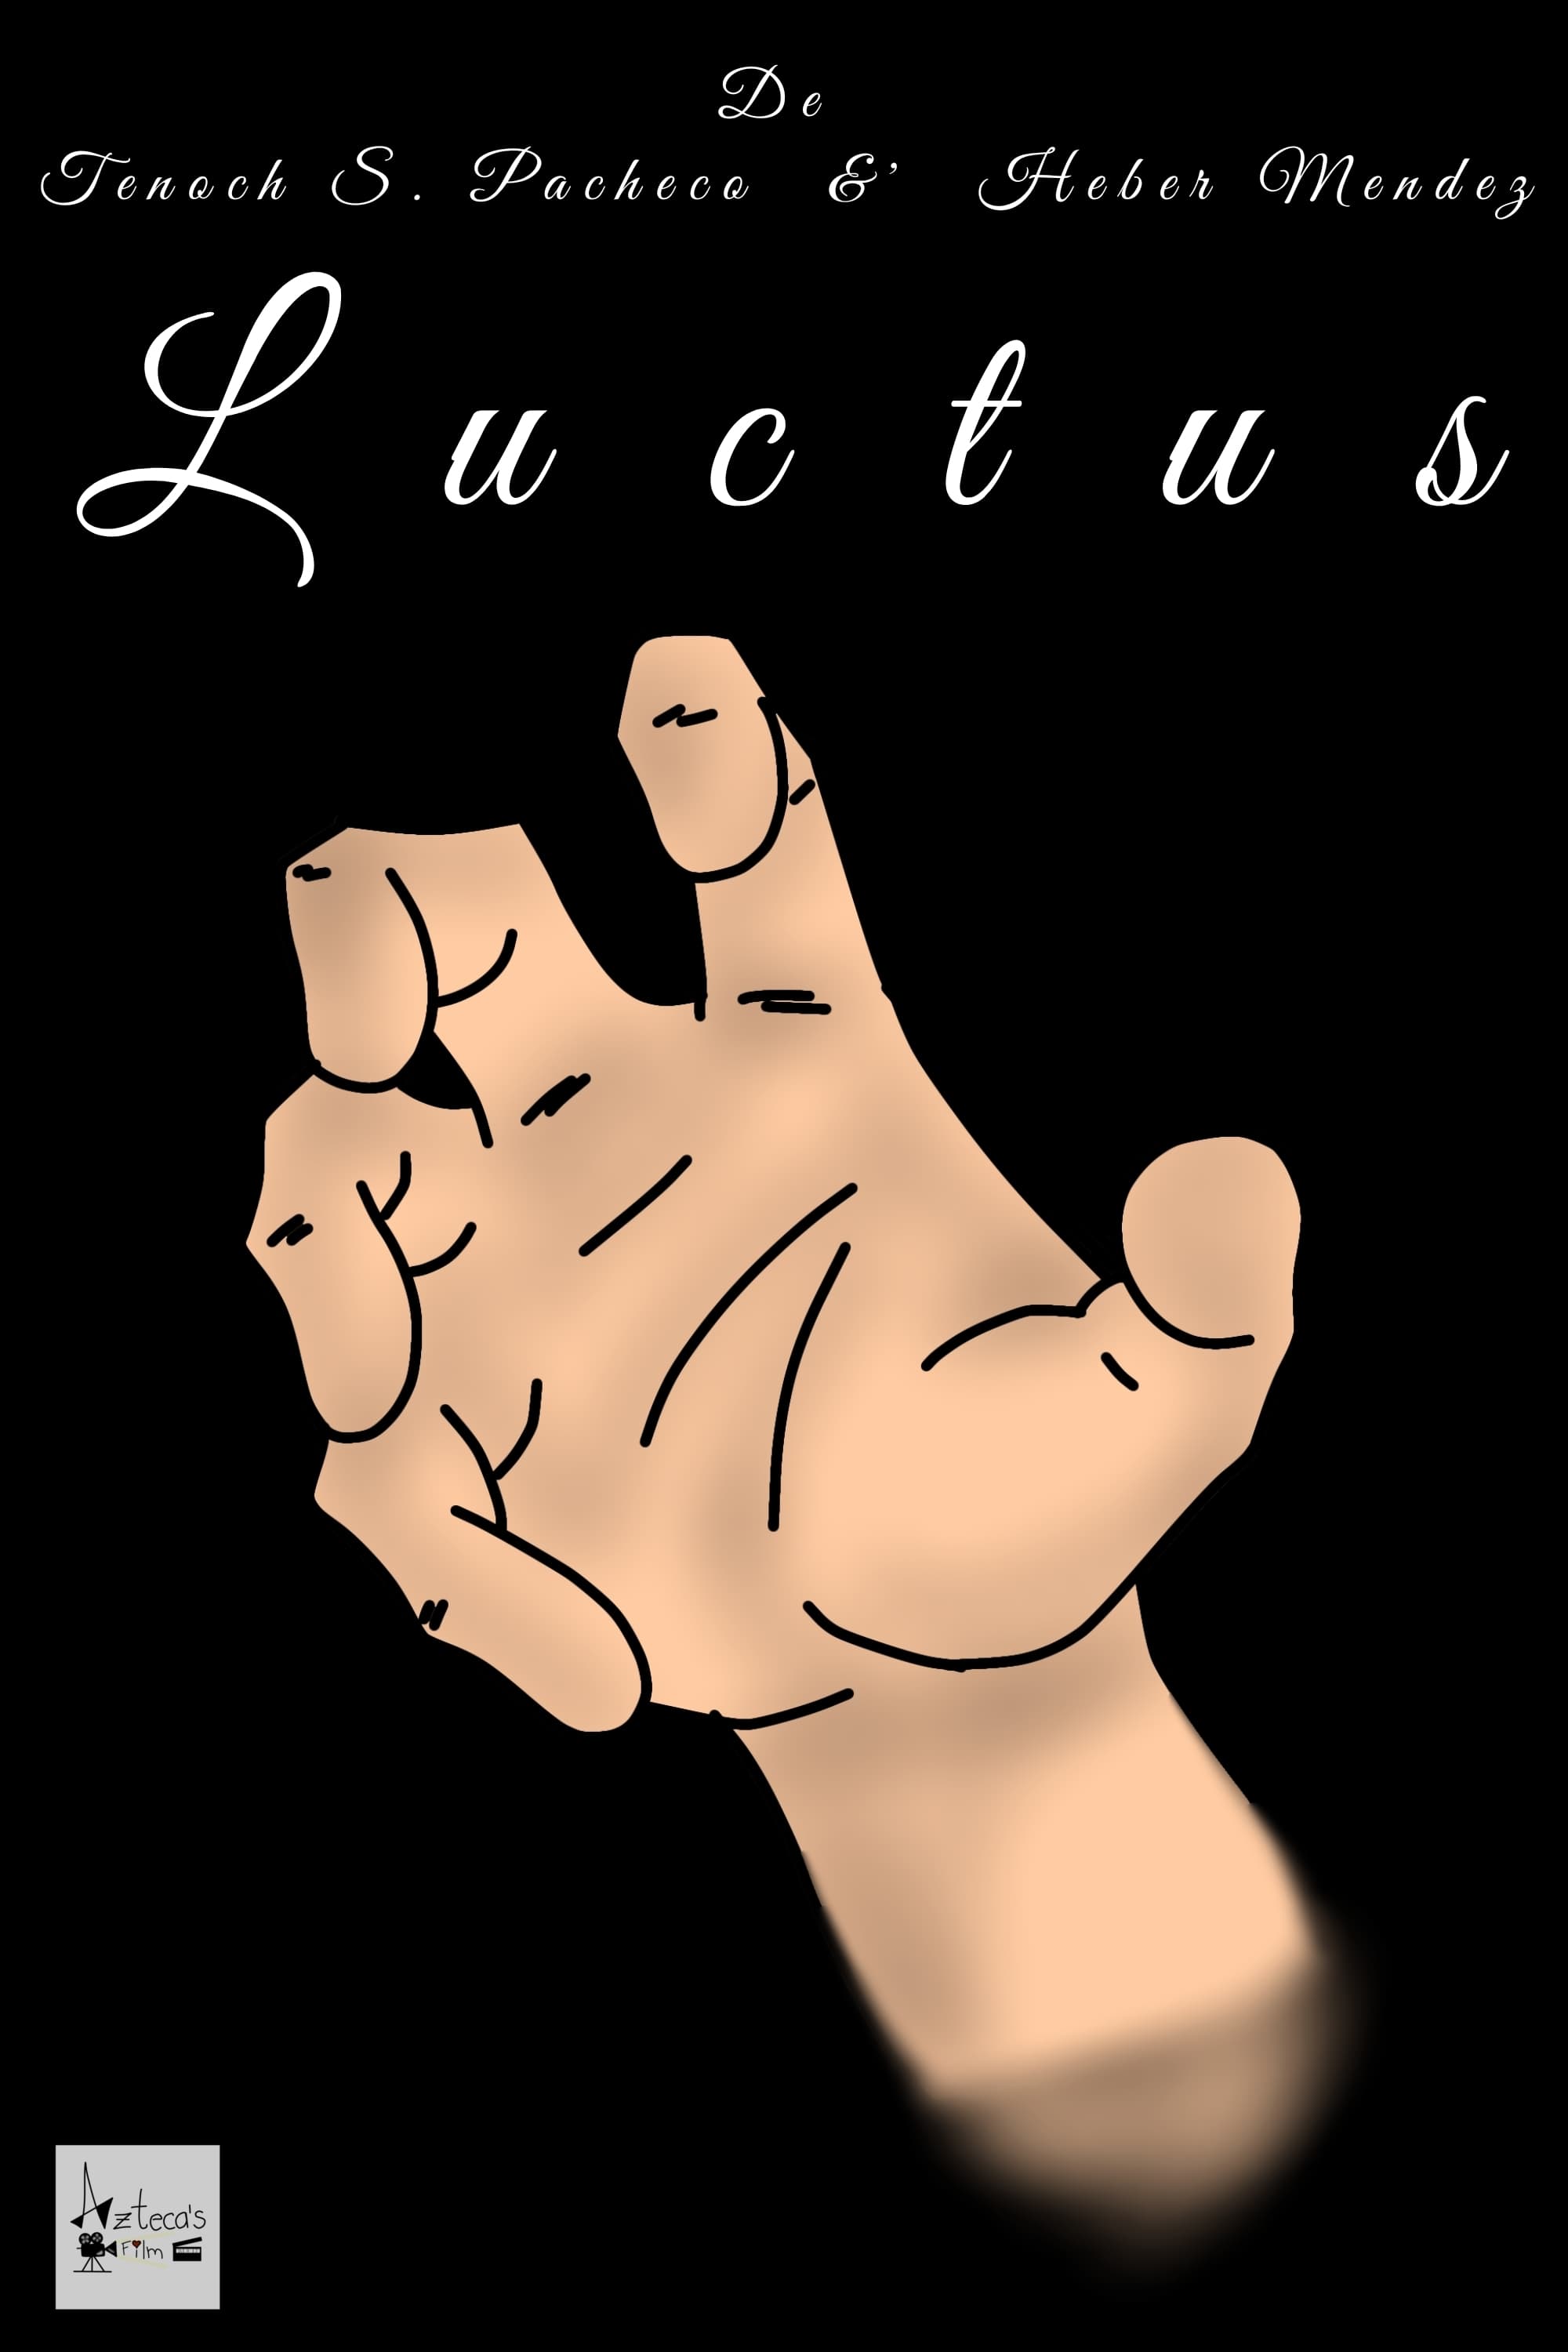 Luctus